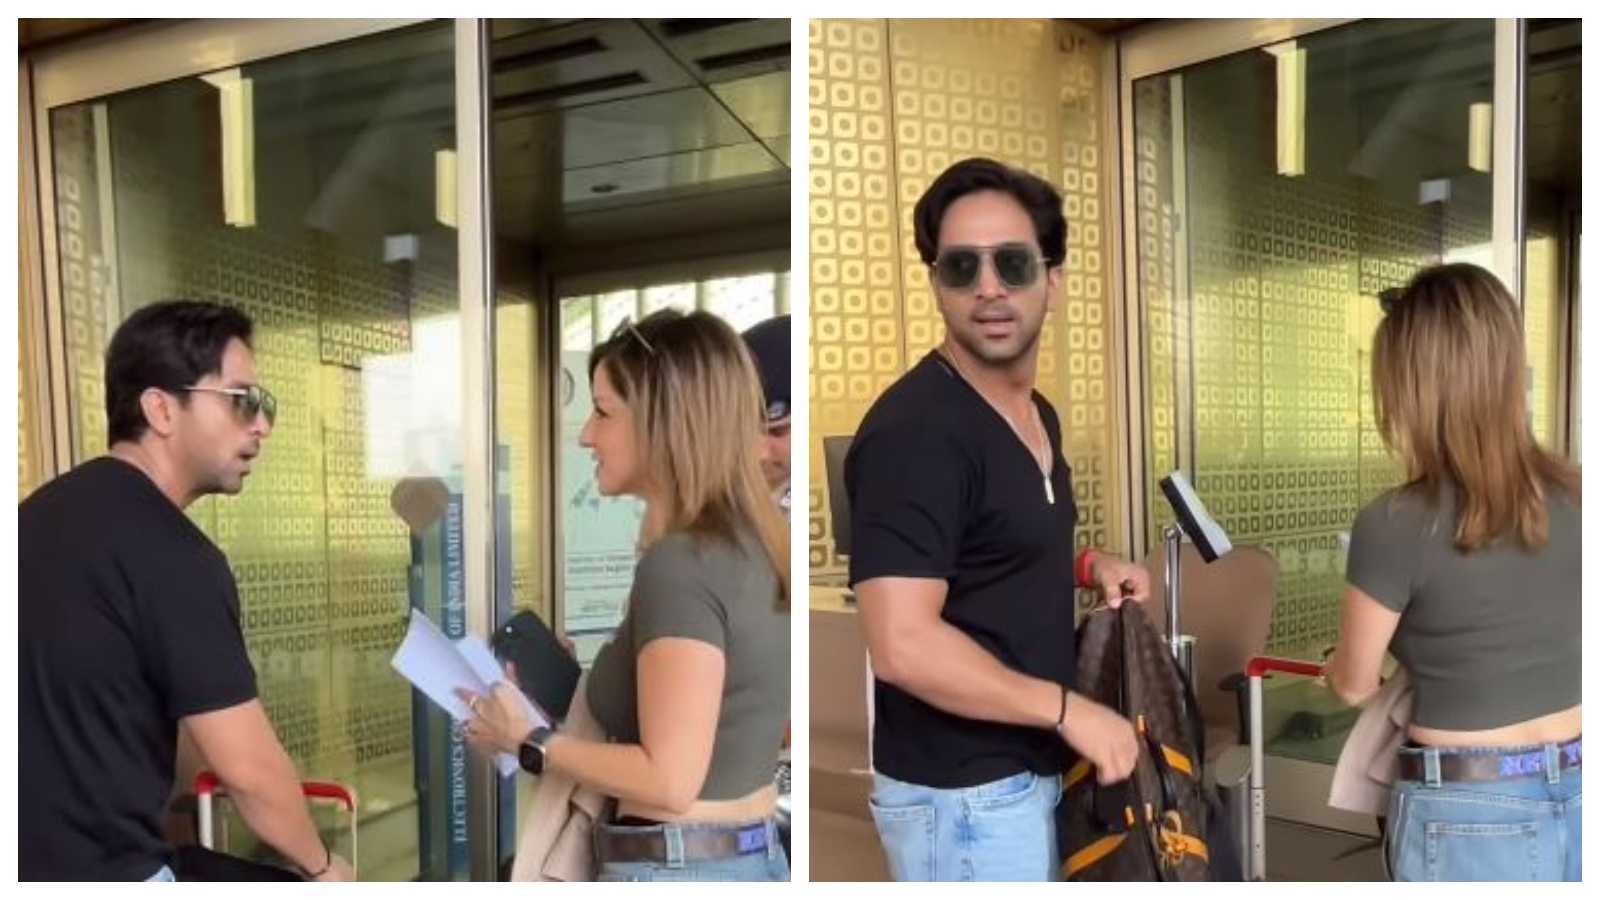 'Sirf photo click krwane aaye the': Sussanne Khan and Arslan Goni make unexpected U-turn from airport, netizens react